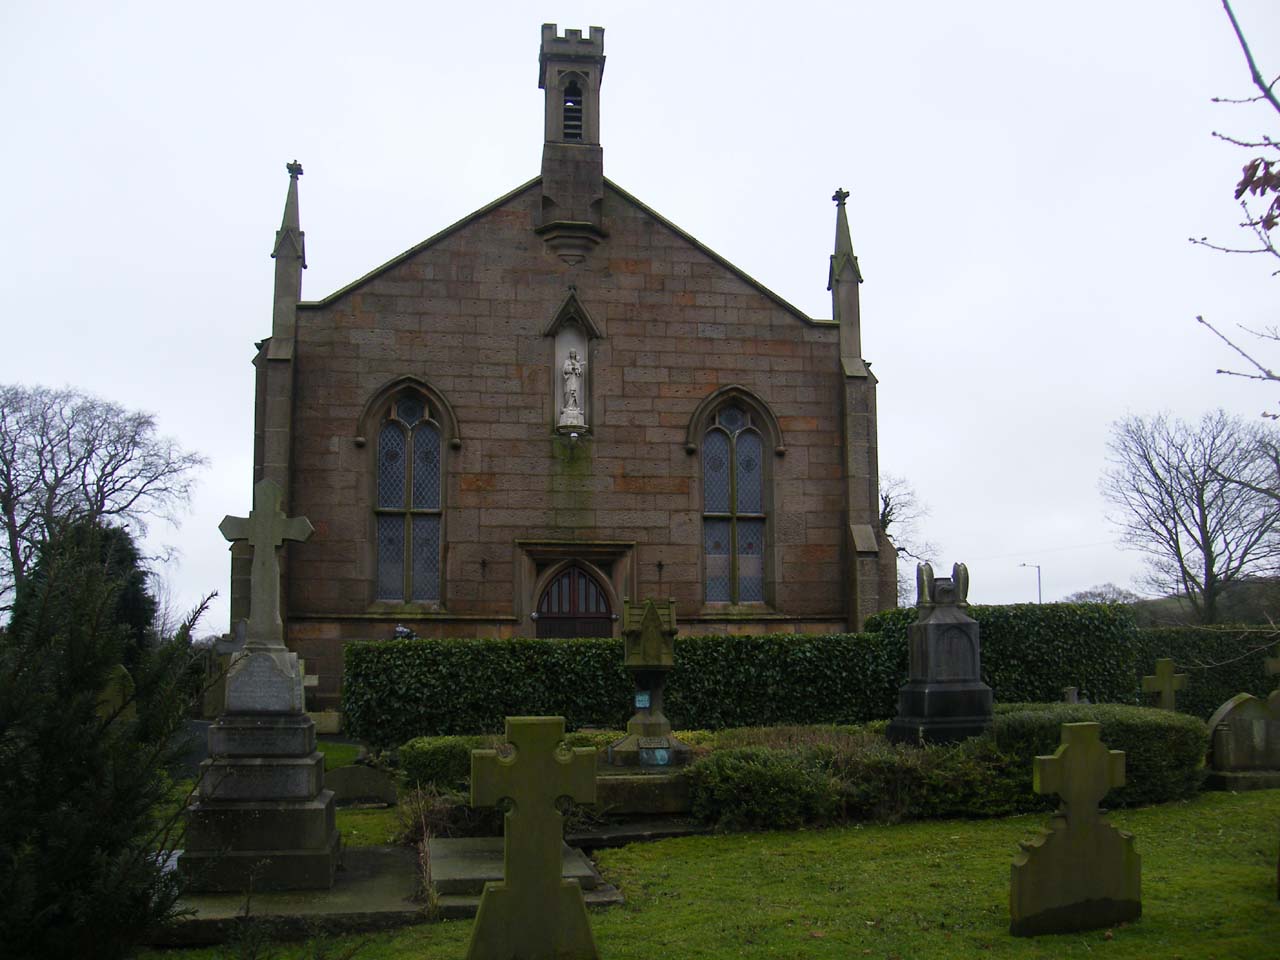 The Church of St Mary from the Front